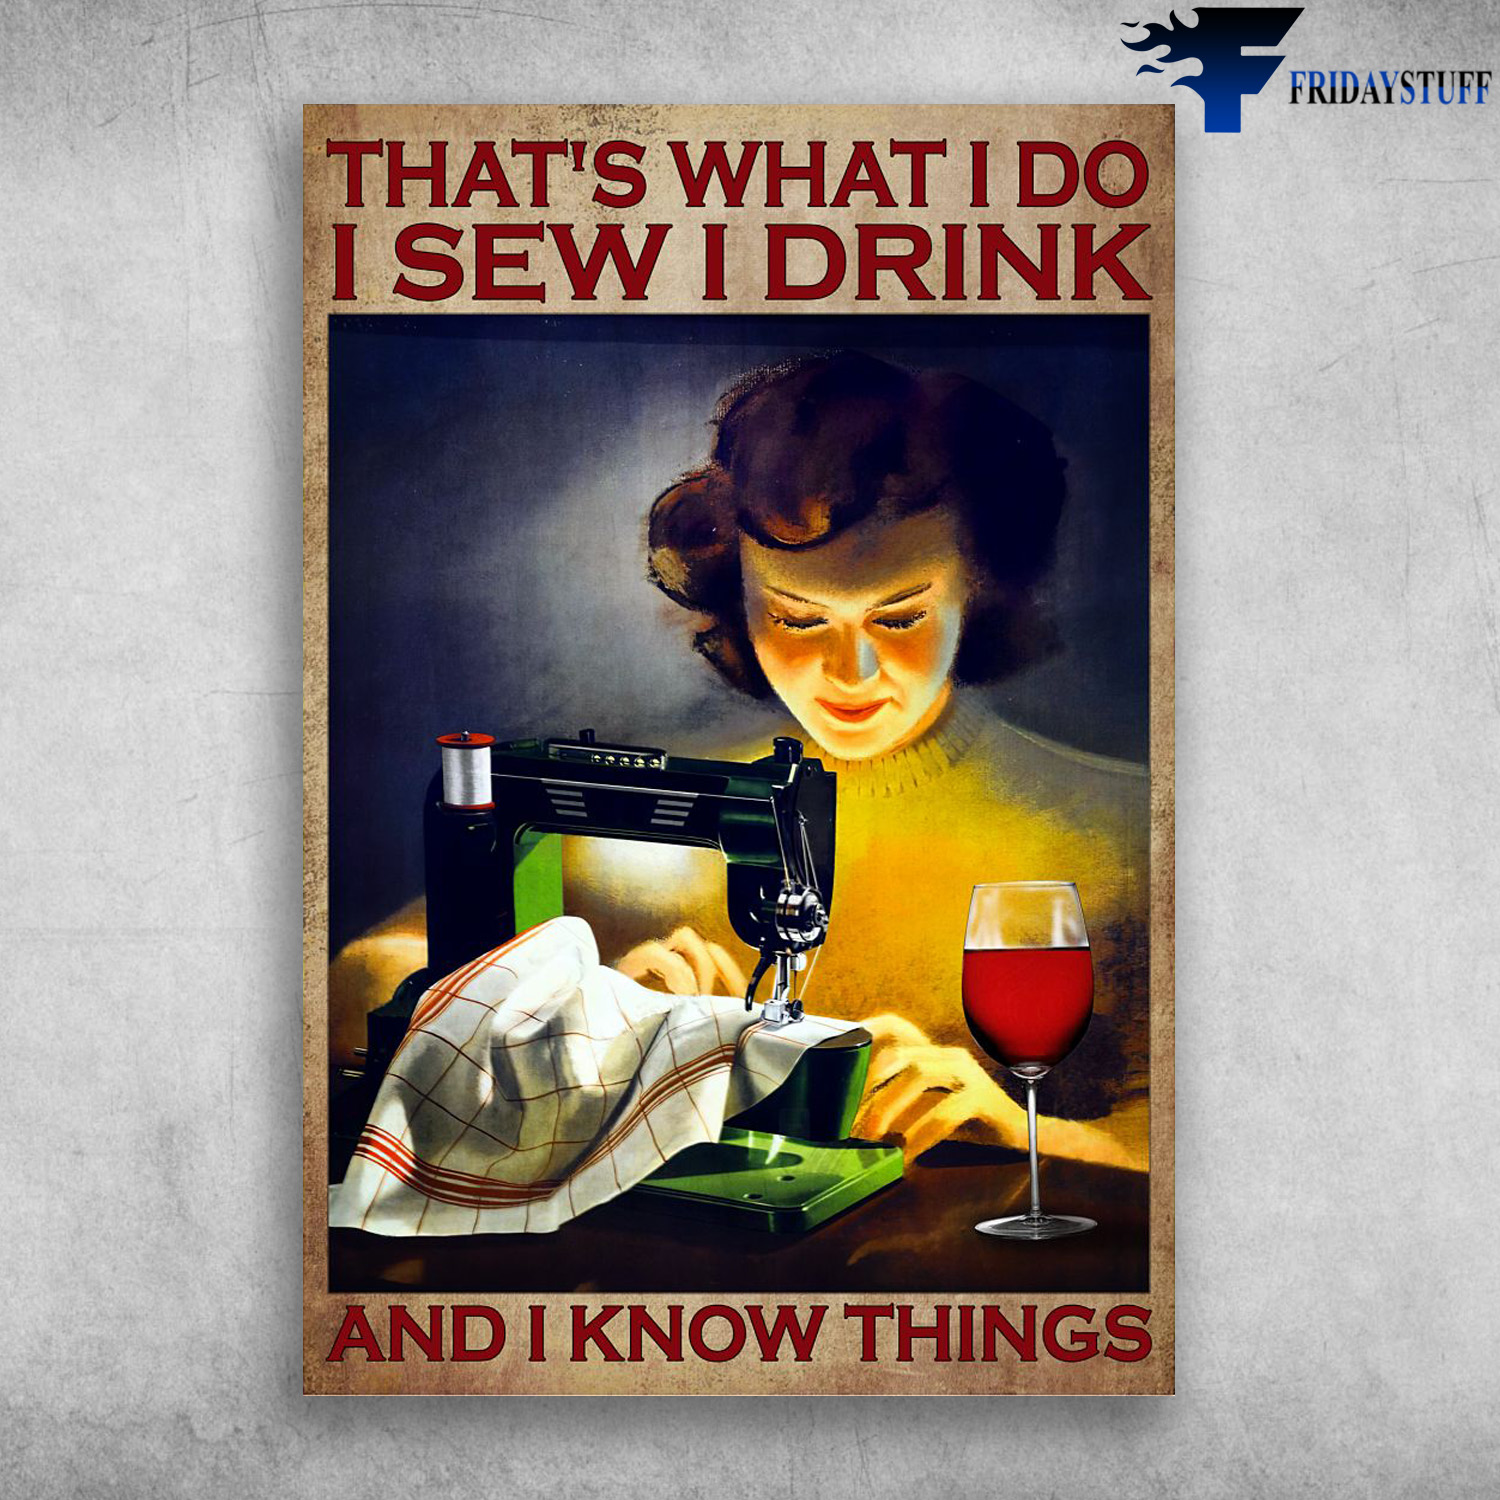 Girl Sewing And Wine - That's What I Do, I Sew, I Drink, And I Know Things